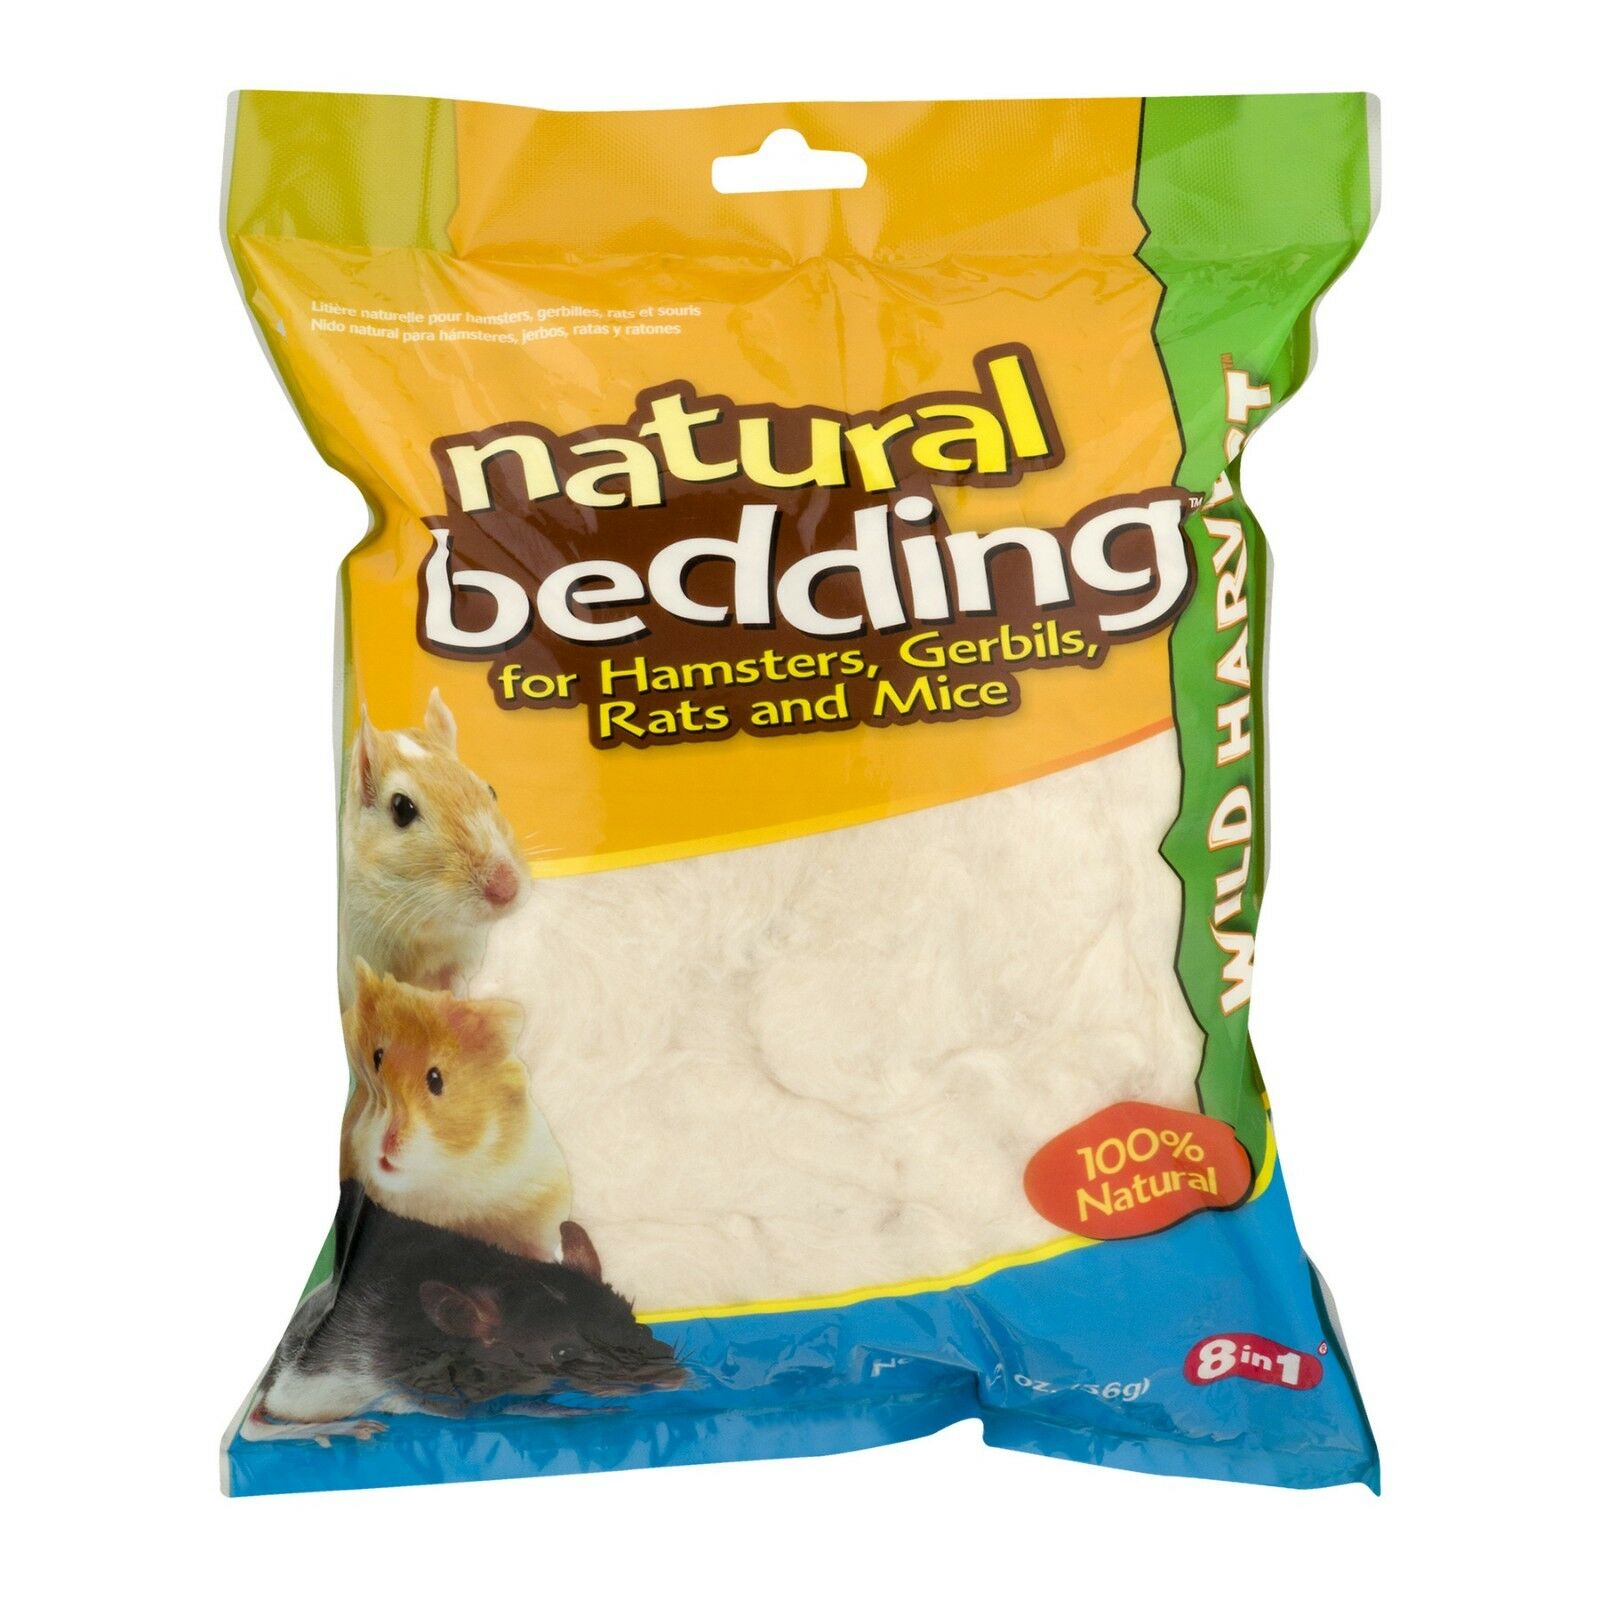 Natural Bedding For Small Animals, Hamsters, Gerbils, Rats, Mice, Nesting. 2 Oz